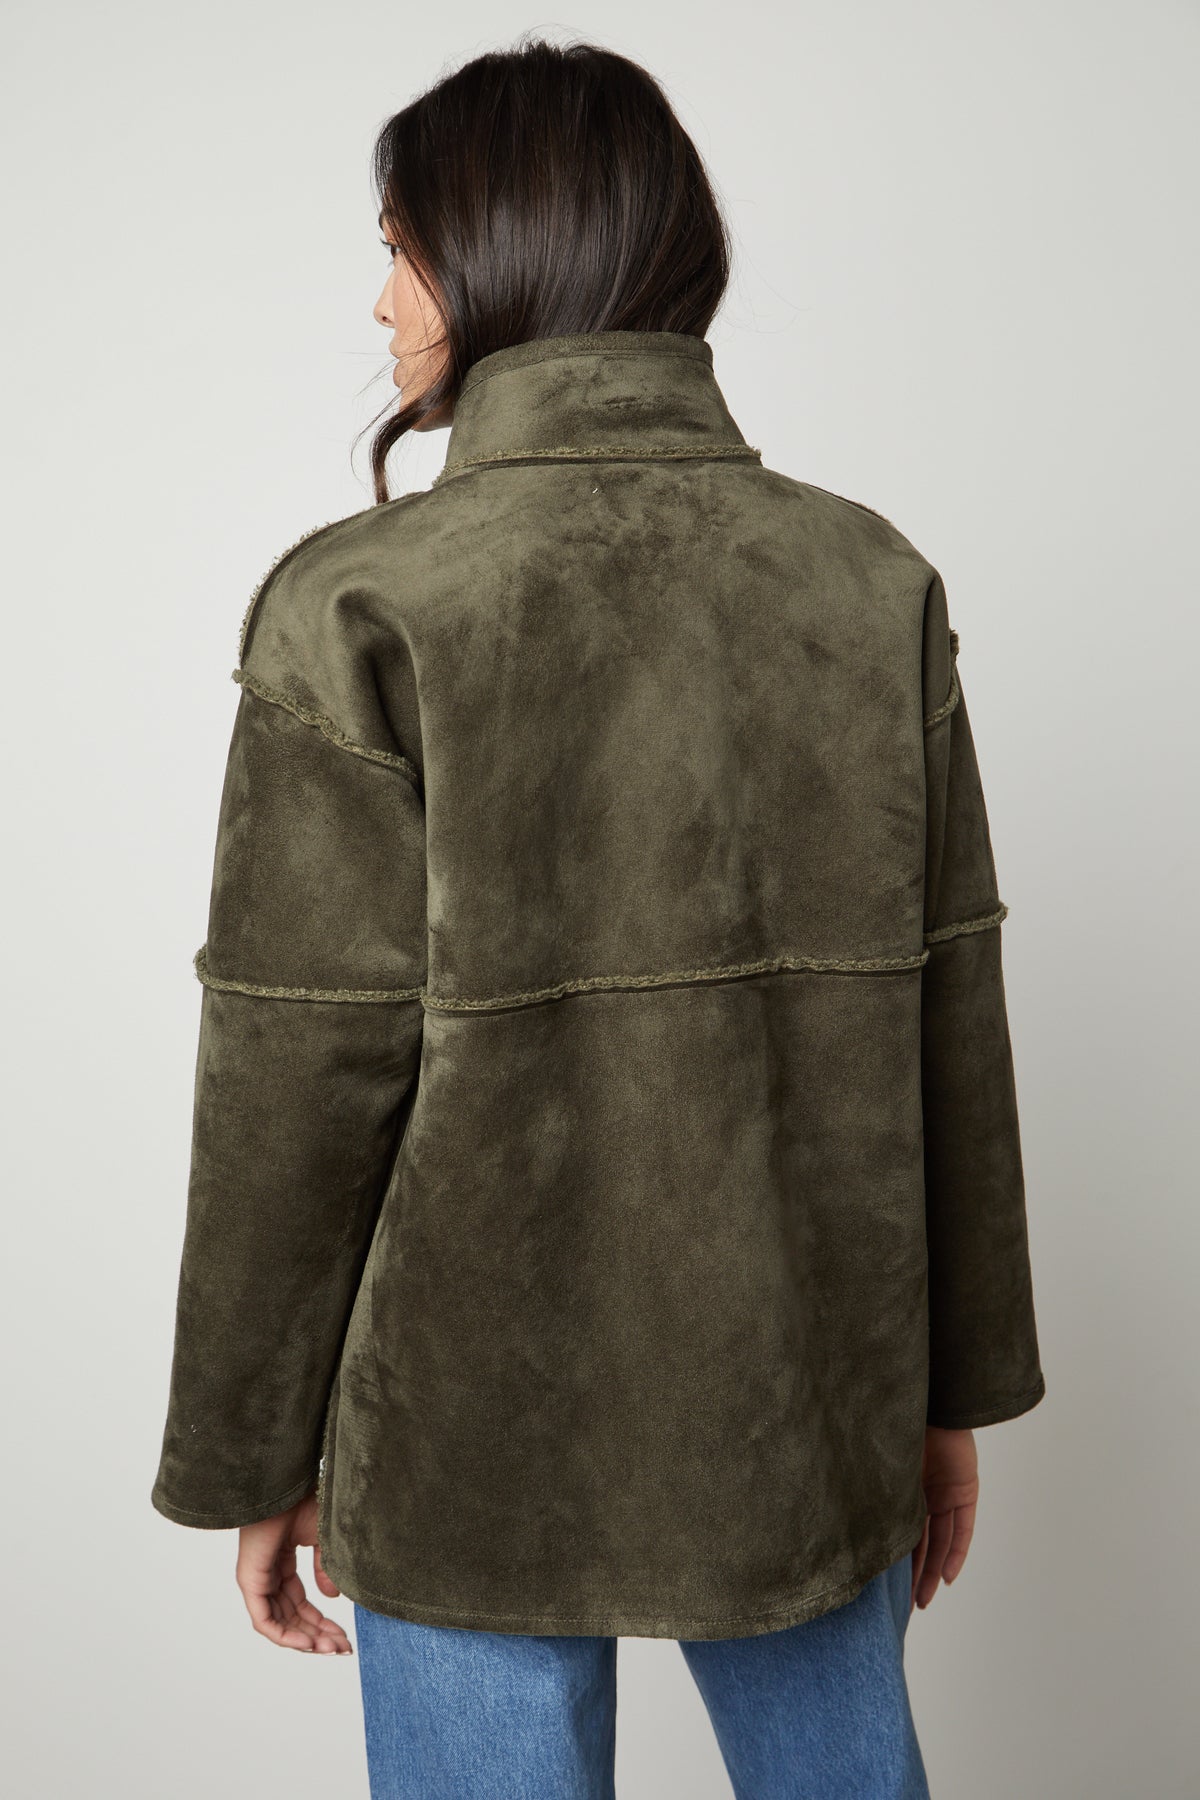 The back view of a woman wearing the Velvet by Graham & Spencer ALBANY LUX SHERPA REVERSIBLE JACKET.-35782611370177